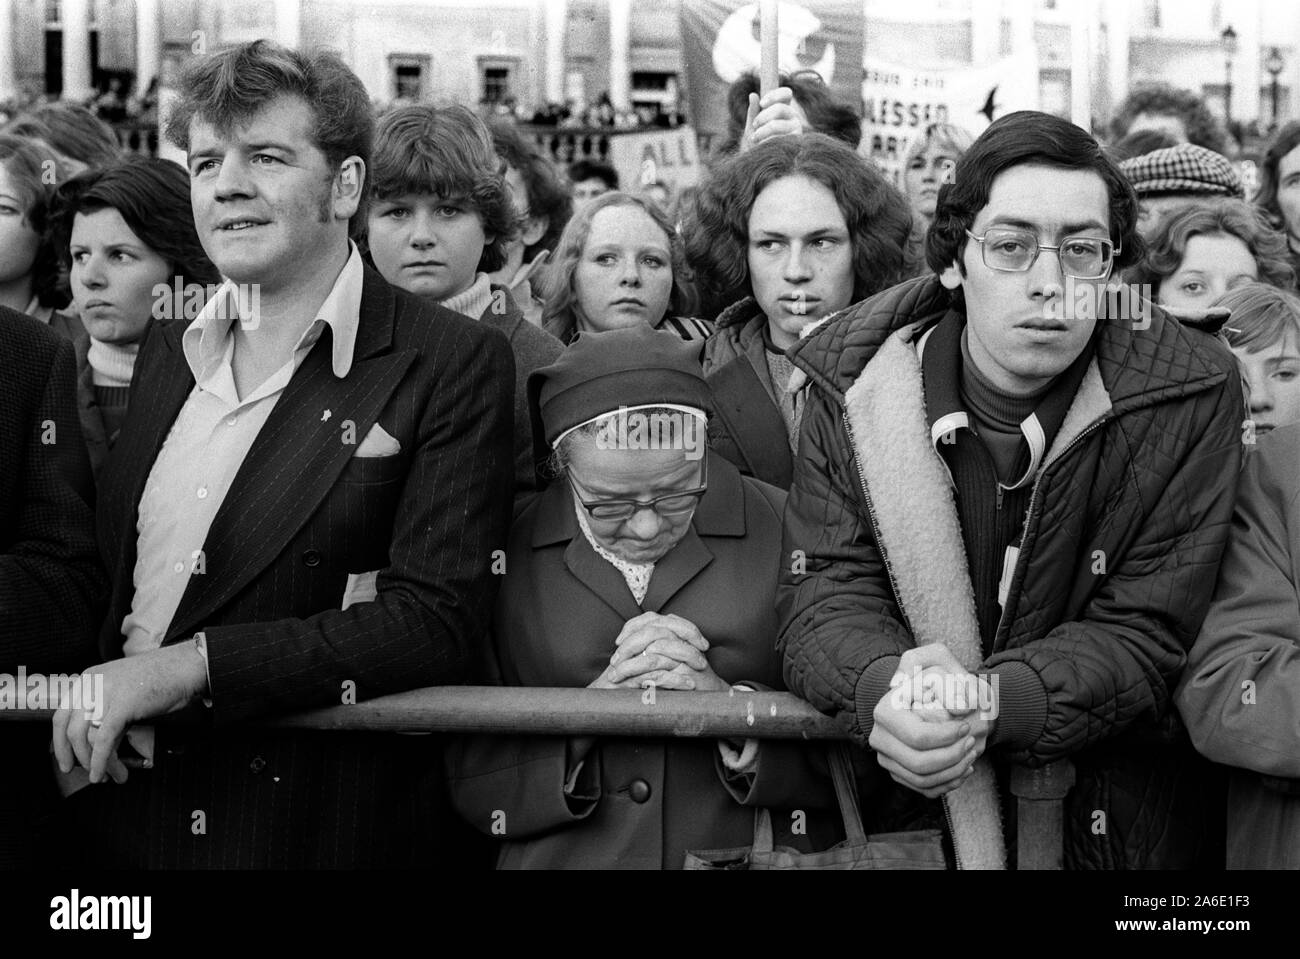 Peace People march against violence in Northern Ireland, 1976. Crowds support the Peace Movement, Trafalgar Square rally. London 1976. 1970s UK HOMER SYKES Stock Photo